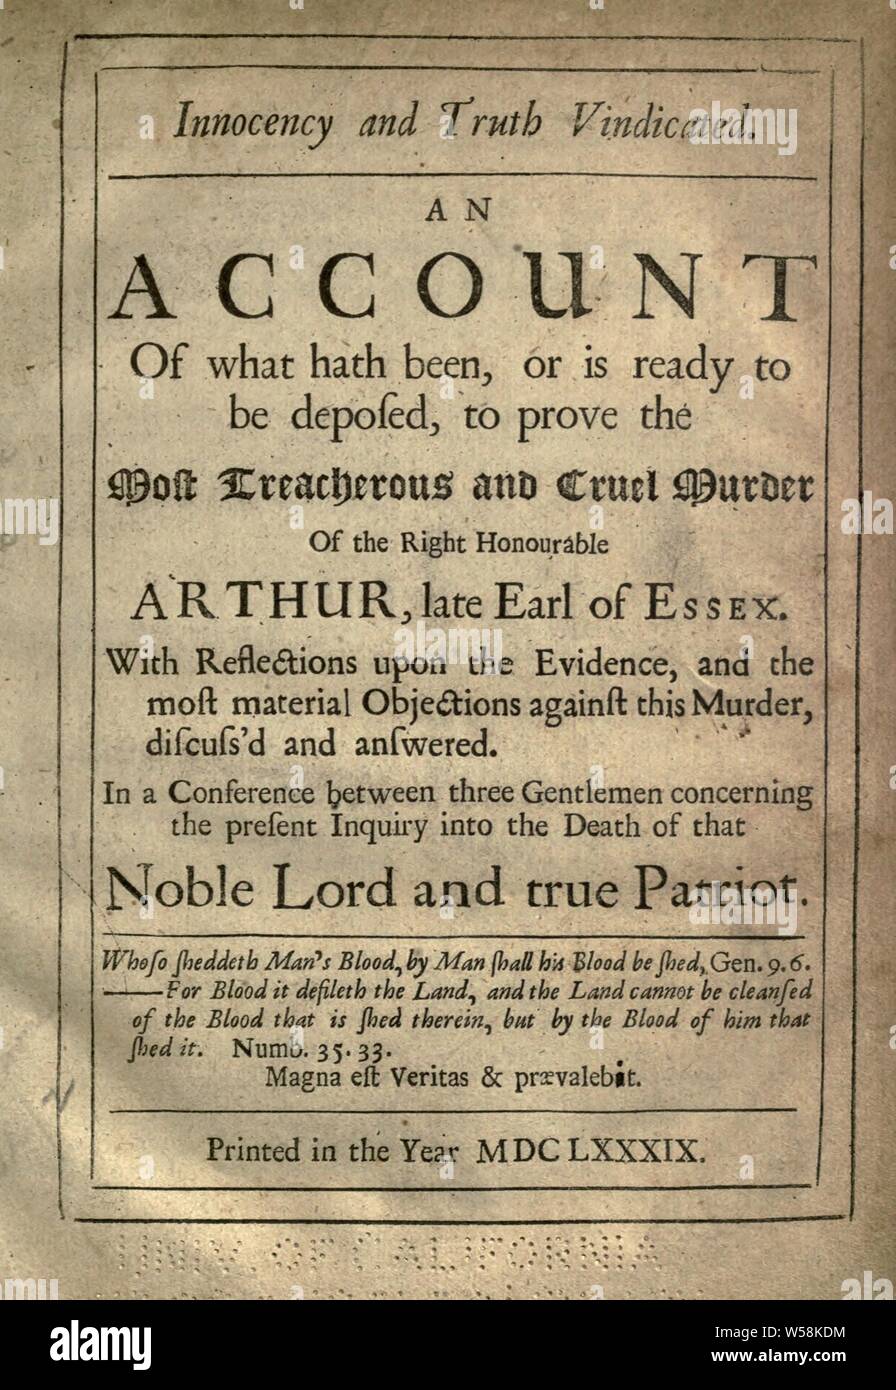 Innocency and truth vindicated : an account of what hath been, or is ready to be deposed, to prove the most treacherous and cruel murder of the Right Honourable Arthur, late Earl of Essex : with reflections upon the evidence, and the most material objections against this murder discuss'd and answered, in a conference between three gentlemen concerning the present inquiry into the death of that noble Lord and true patriot : Braddon, Laurence, d. 1724 Stock Photo